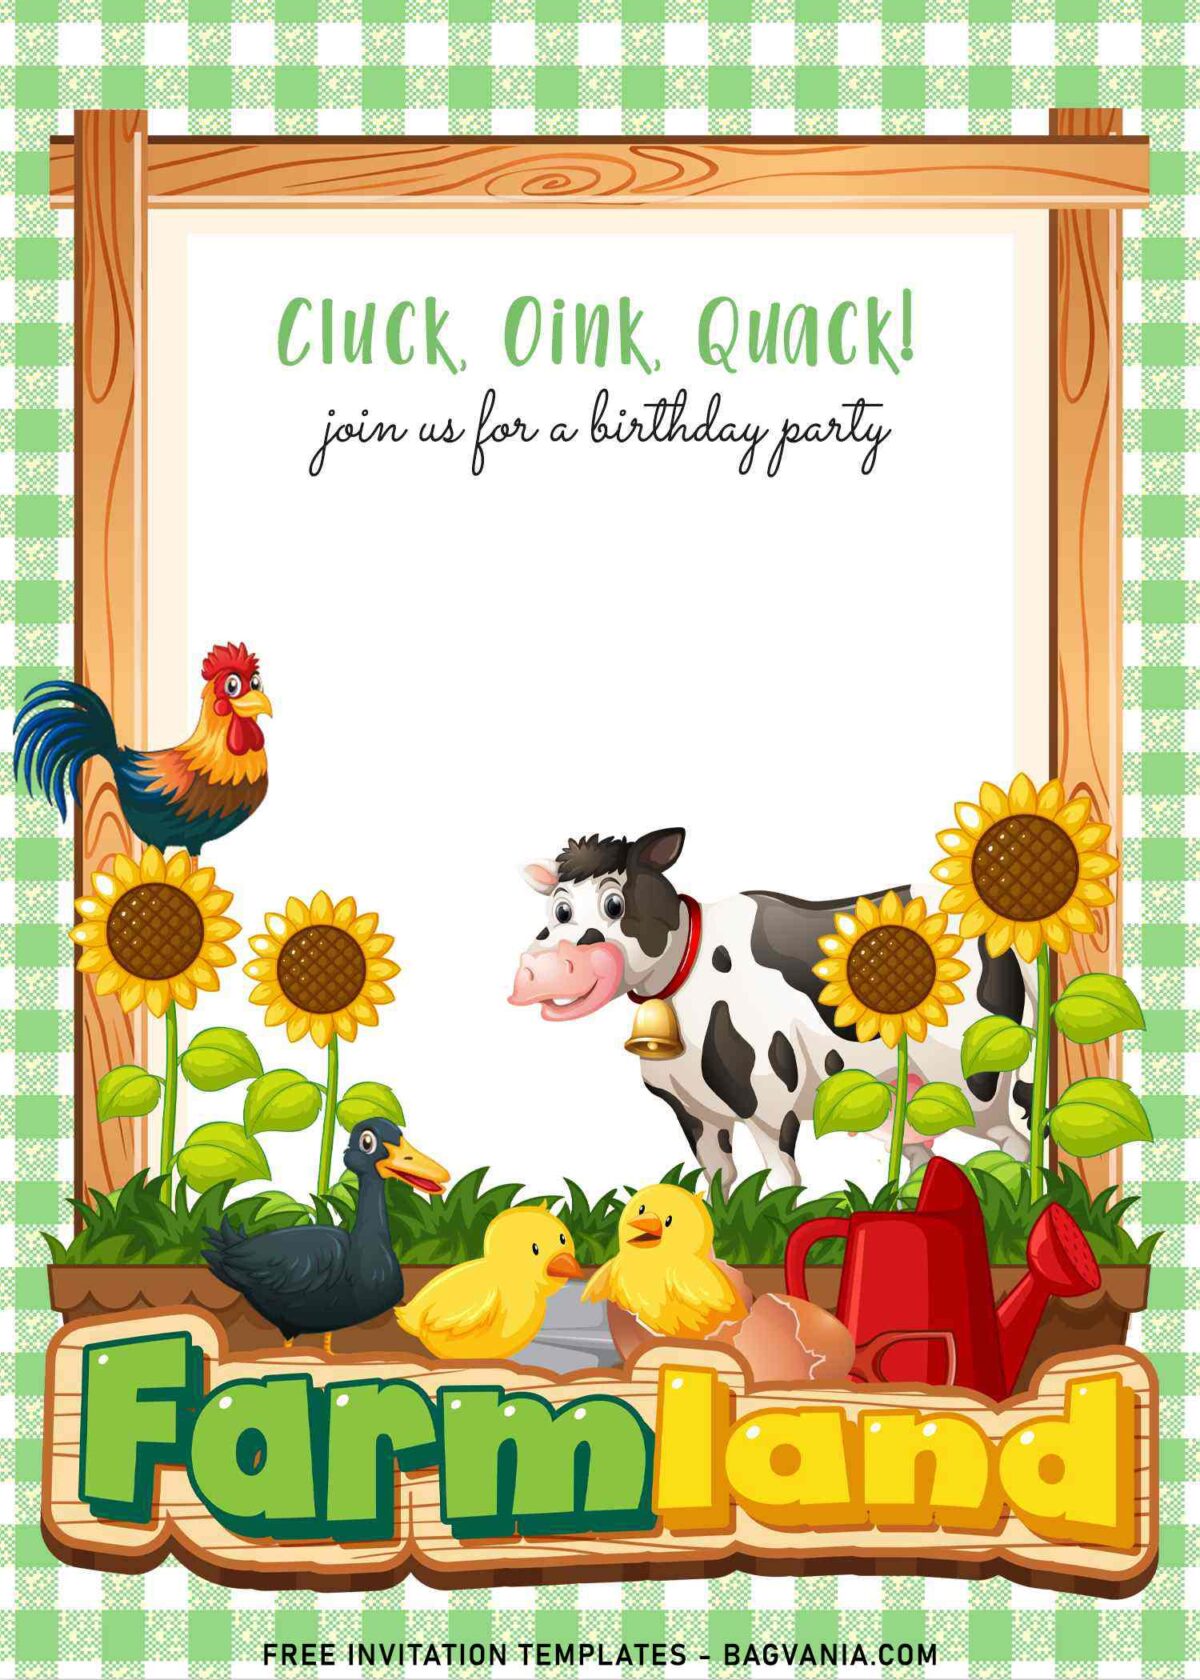 7+ Farm Animals And Garden Flowers Birthday Invitation Templates with chicken and cow